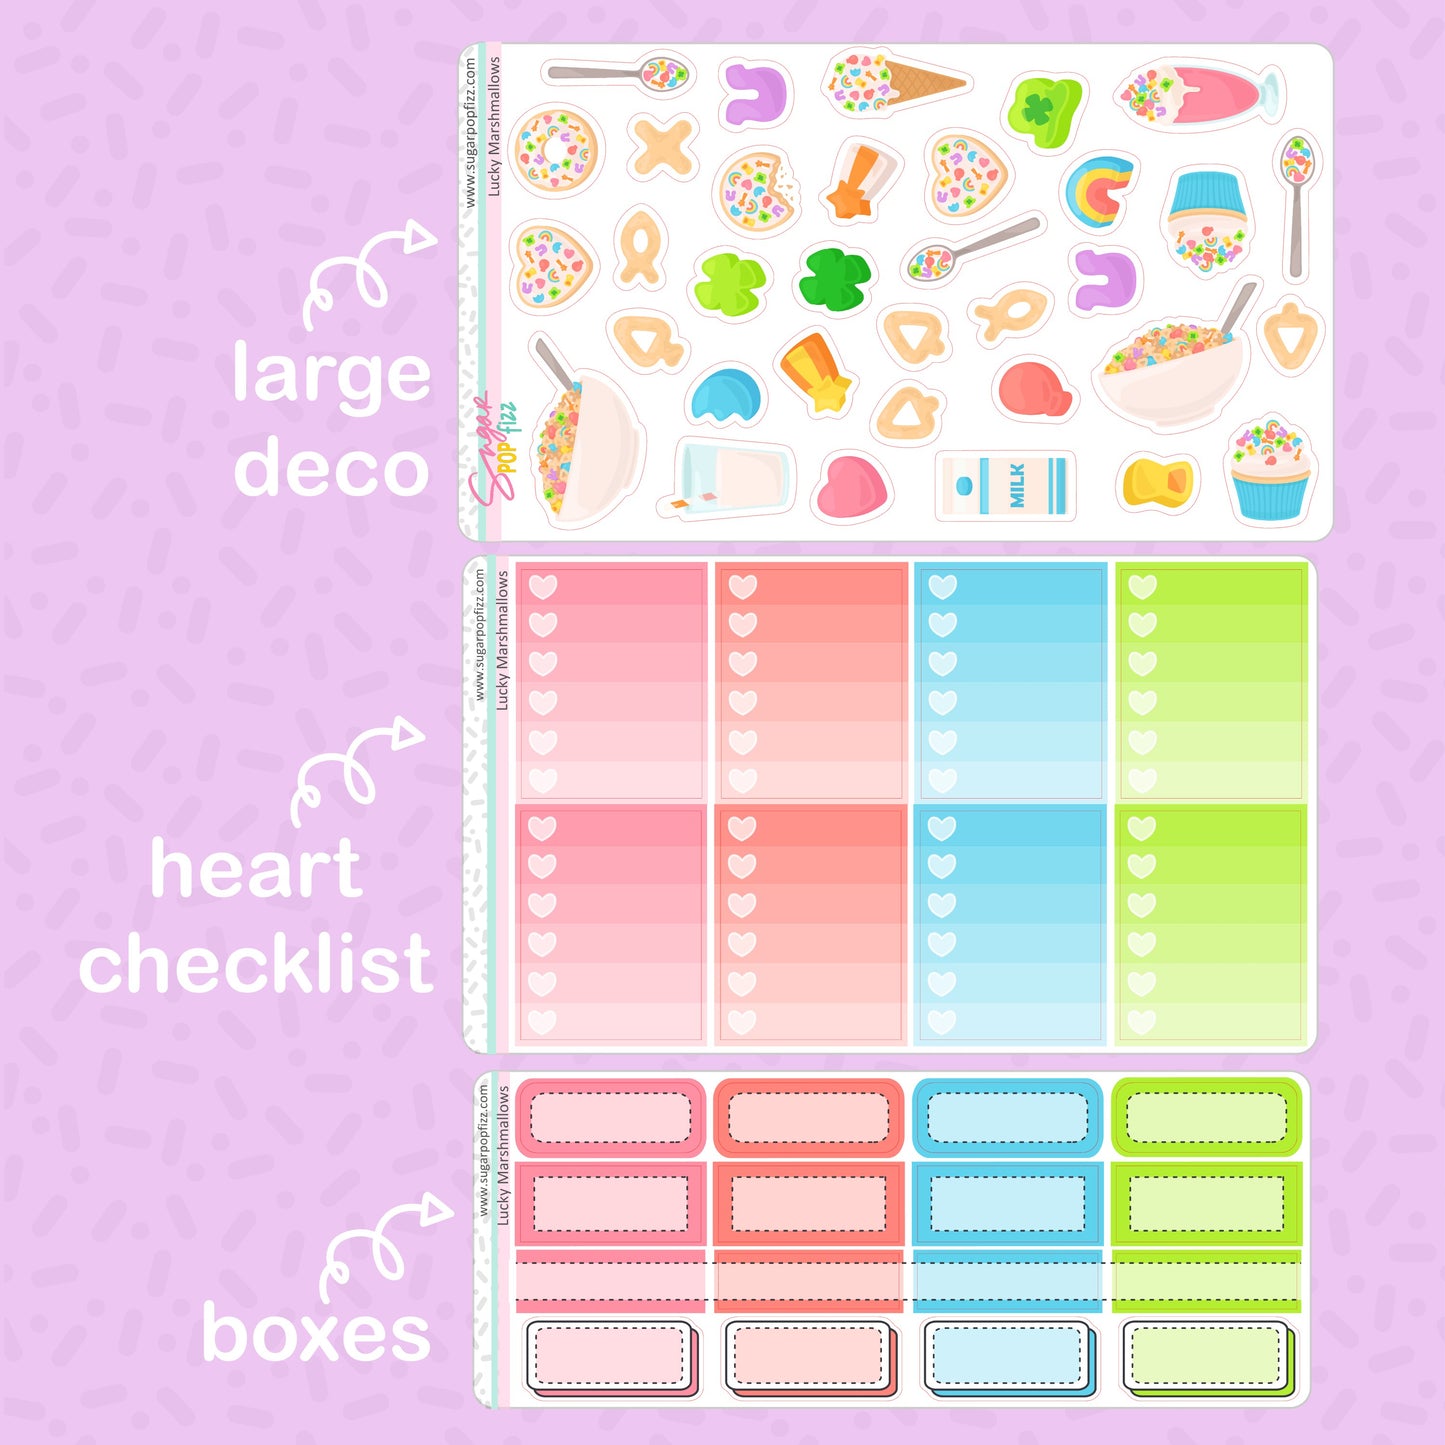 Lucky Marshmallows Weekly Kit Add-ons